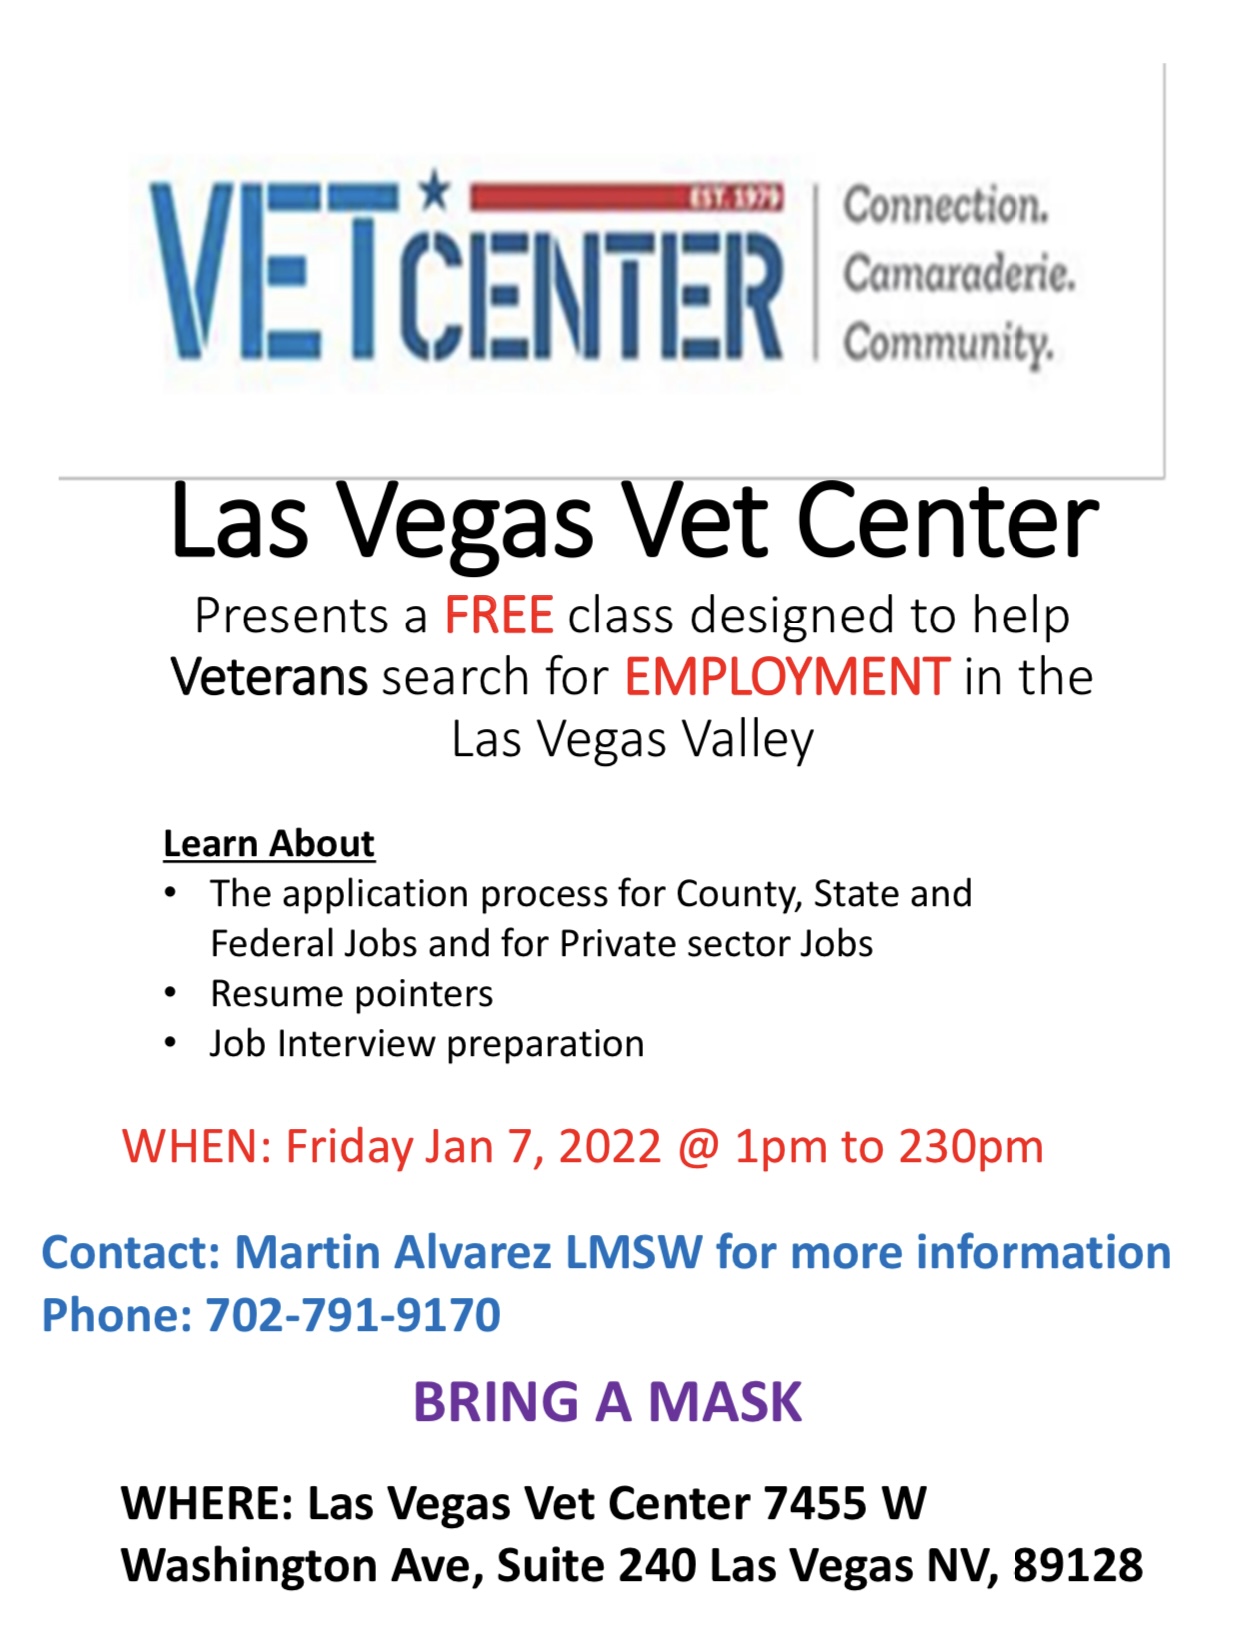 ****Event Cancelled**** Las Vegas Vet Center Presents a FREE class designed to help Veterans search for EMPLOYMENT